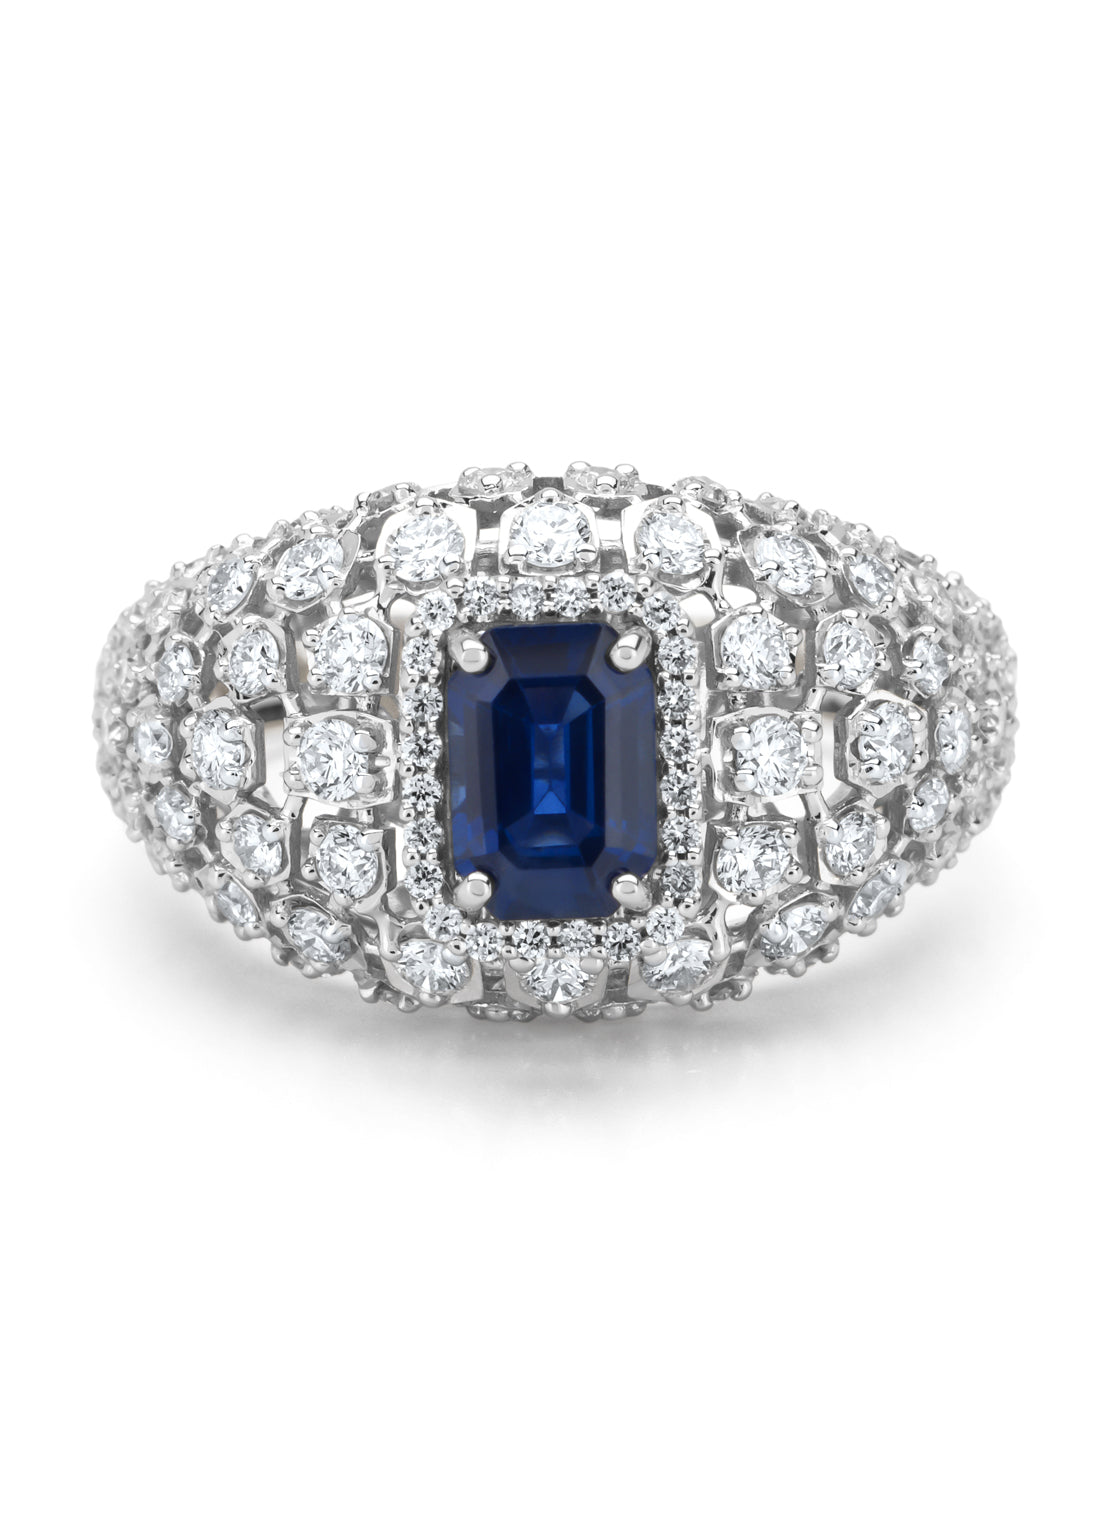 White gold ring, 0.90 CT Blue Saffier, Gallery